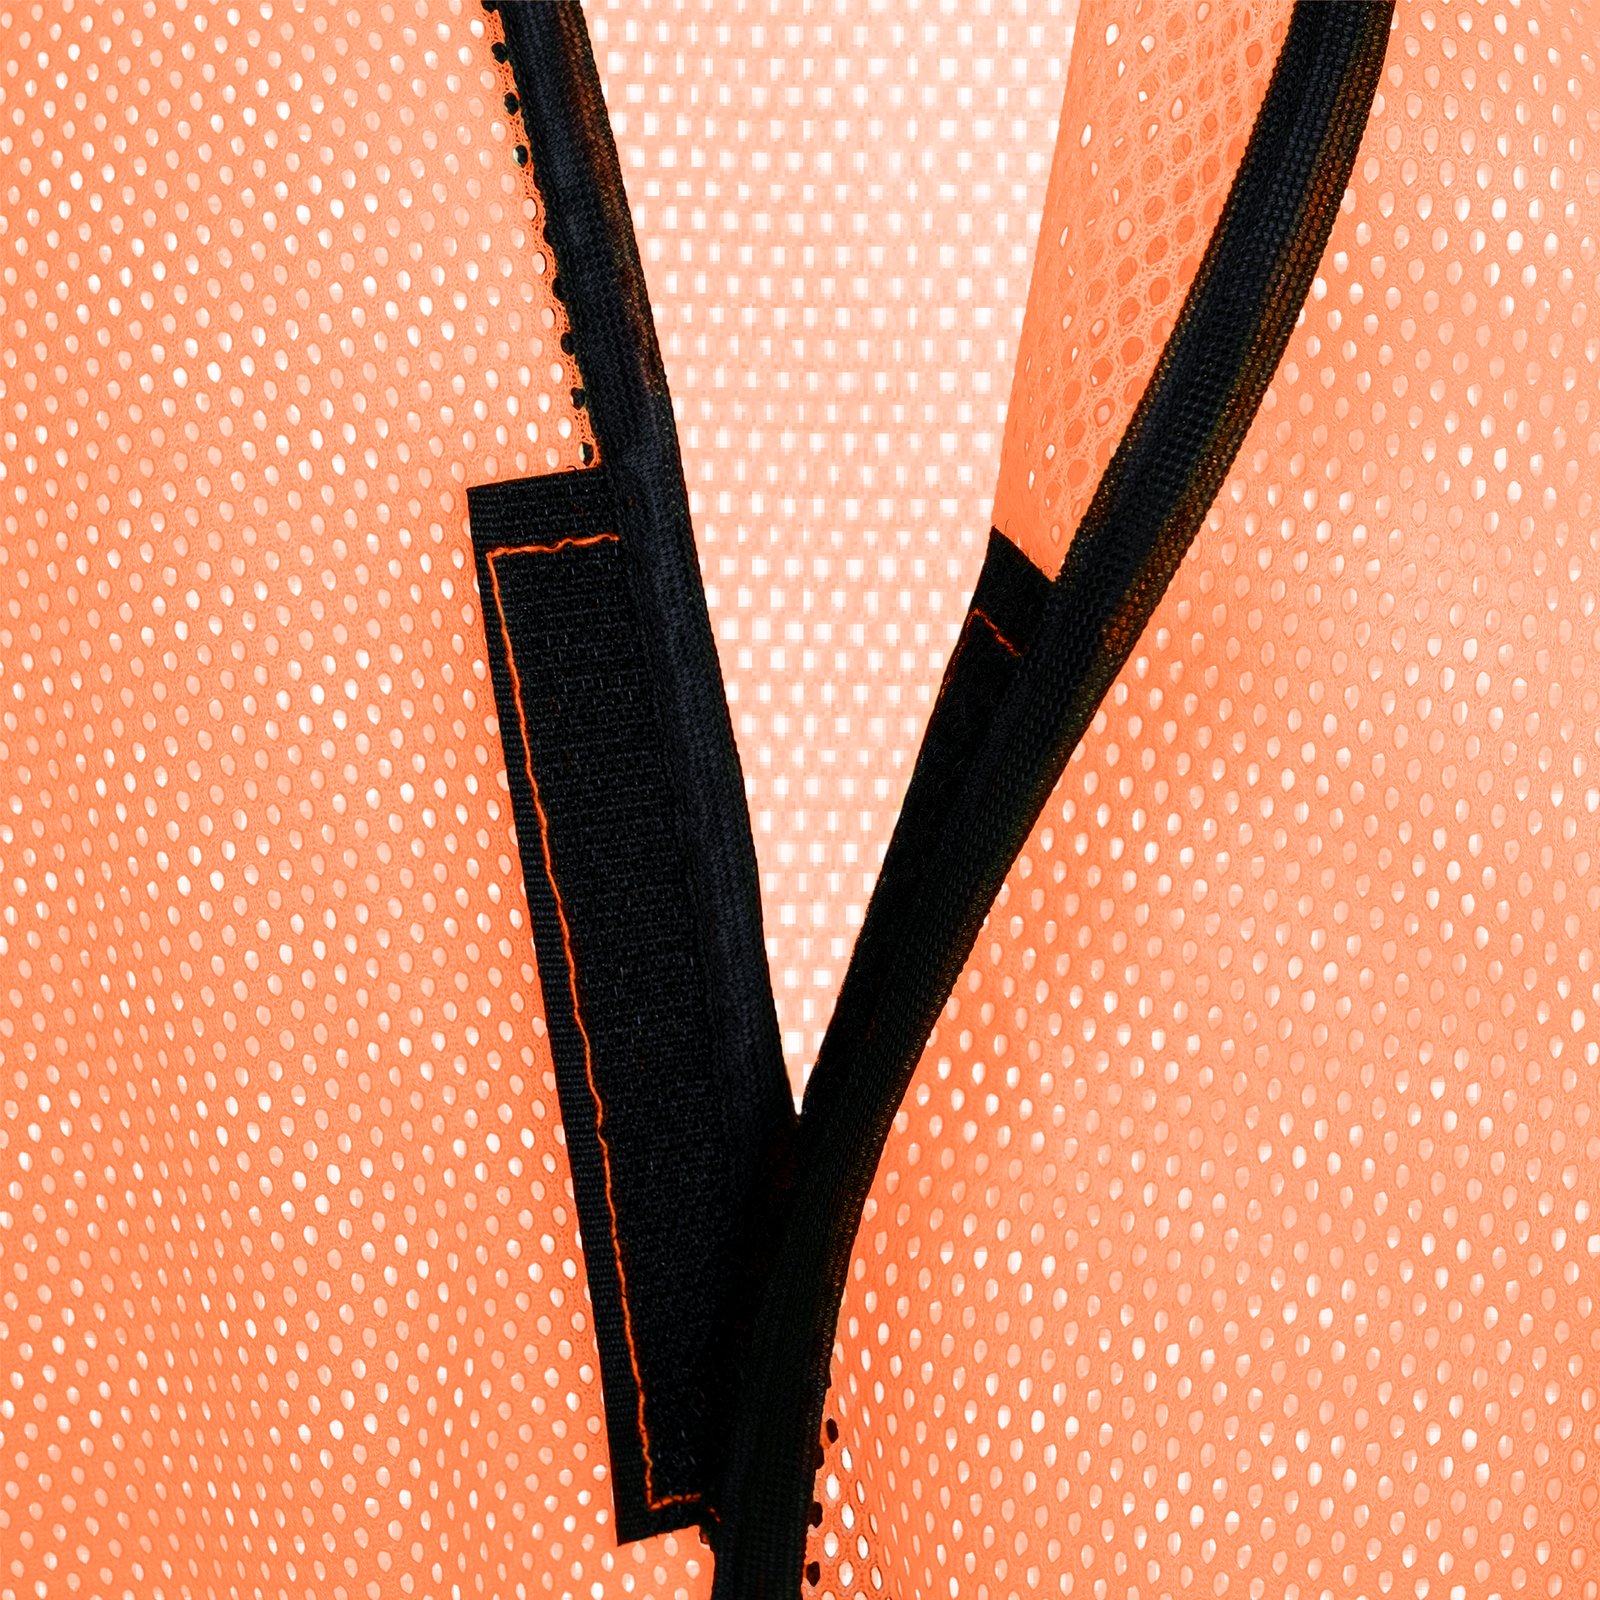 Close-up shows the hook and loop fastener system of the hi visibility safety vest with prismatic stripes